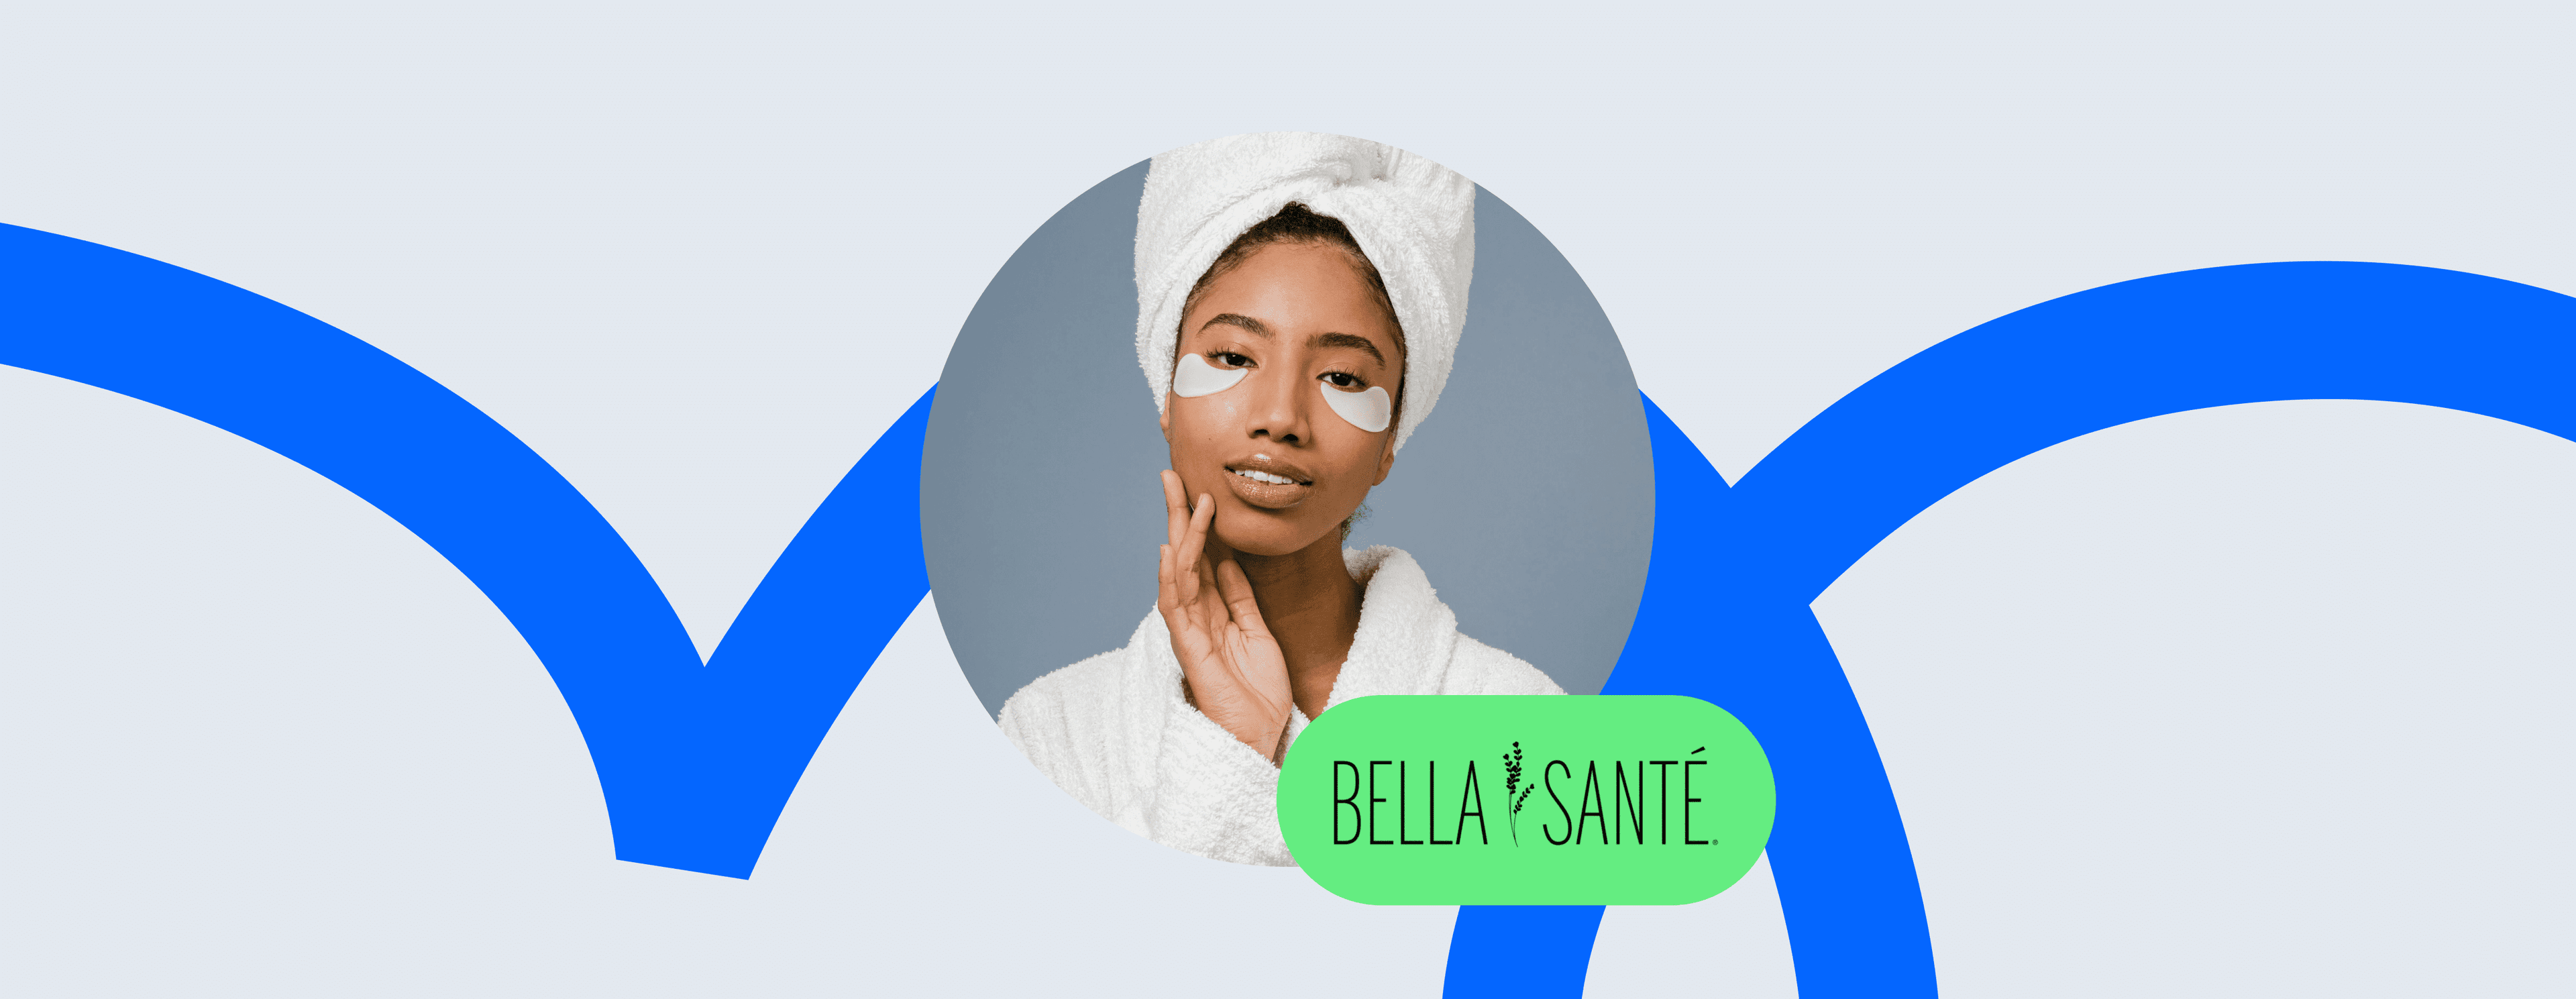 Bella Santé Earns $66K in Sales After Switching to Lyro